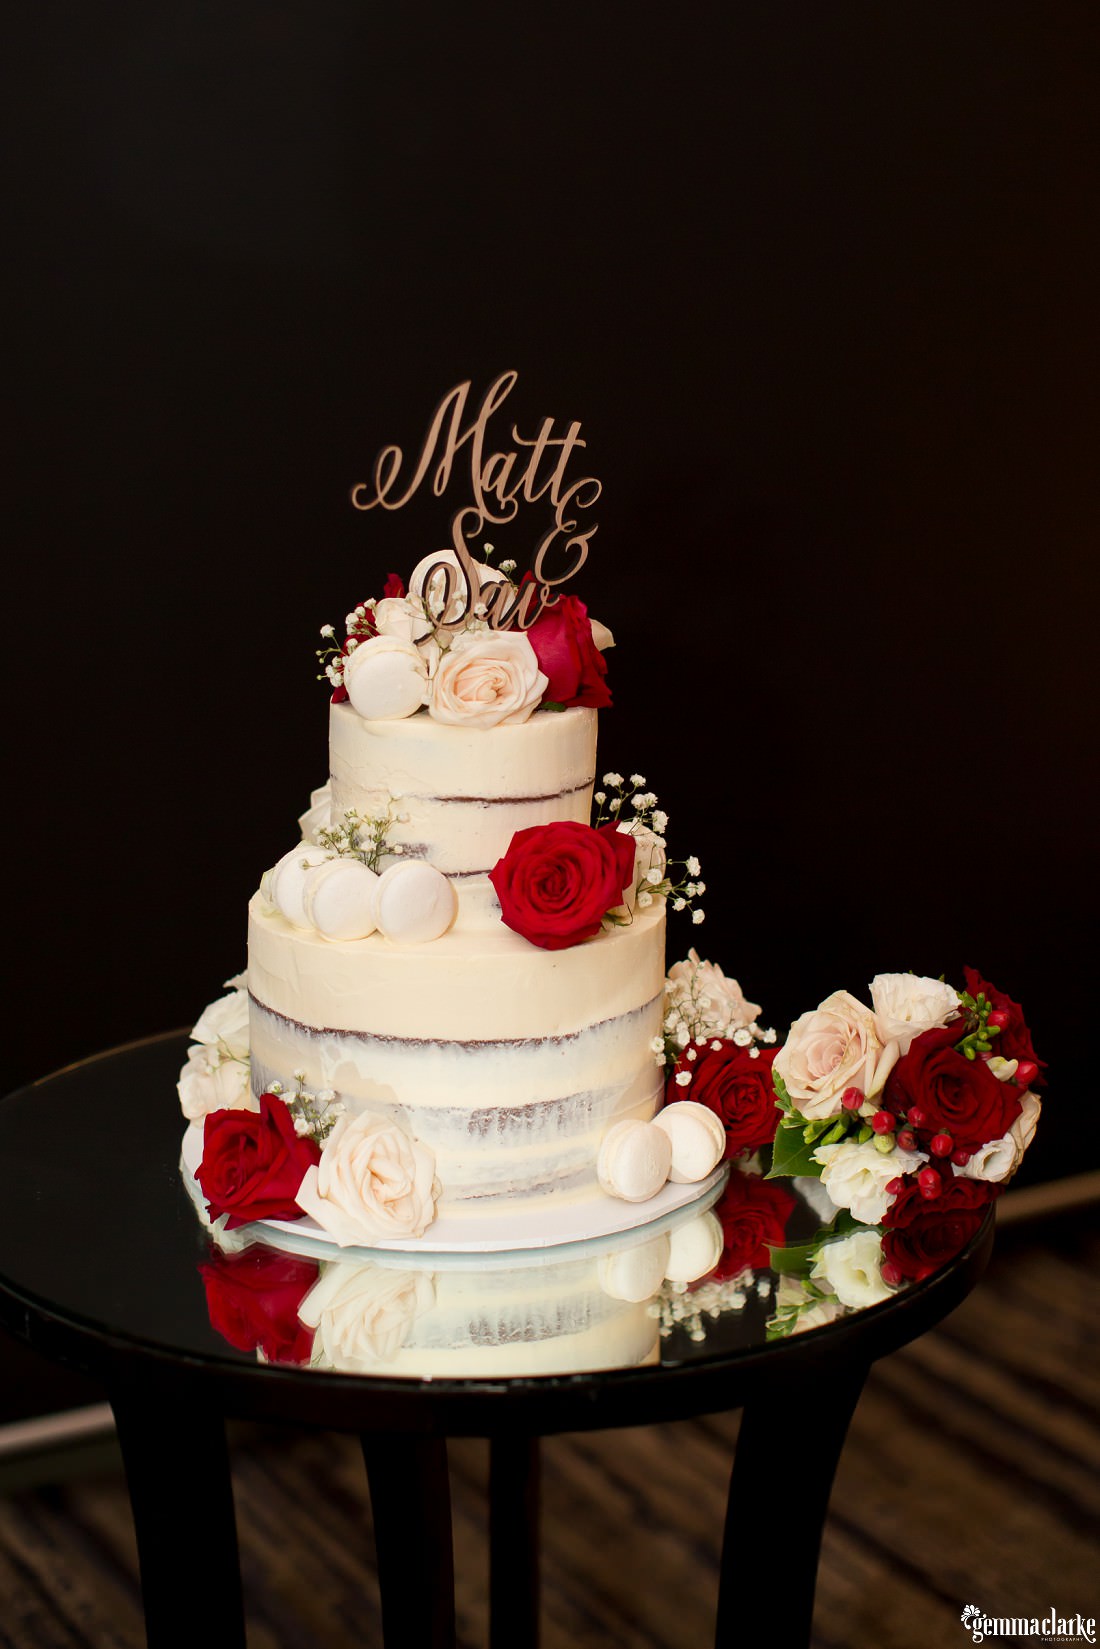 A two tiered naked cake with white and deep red roses - Deckhouse Wedding